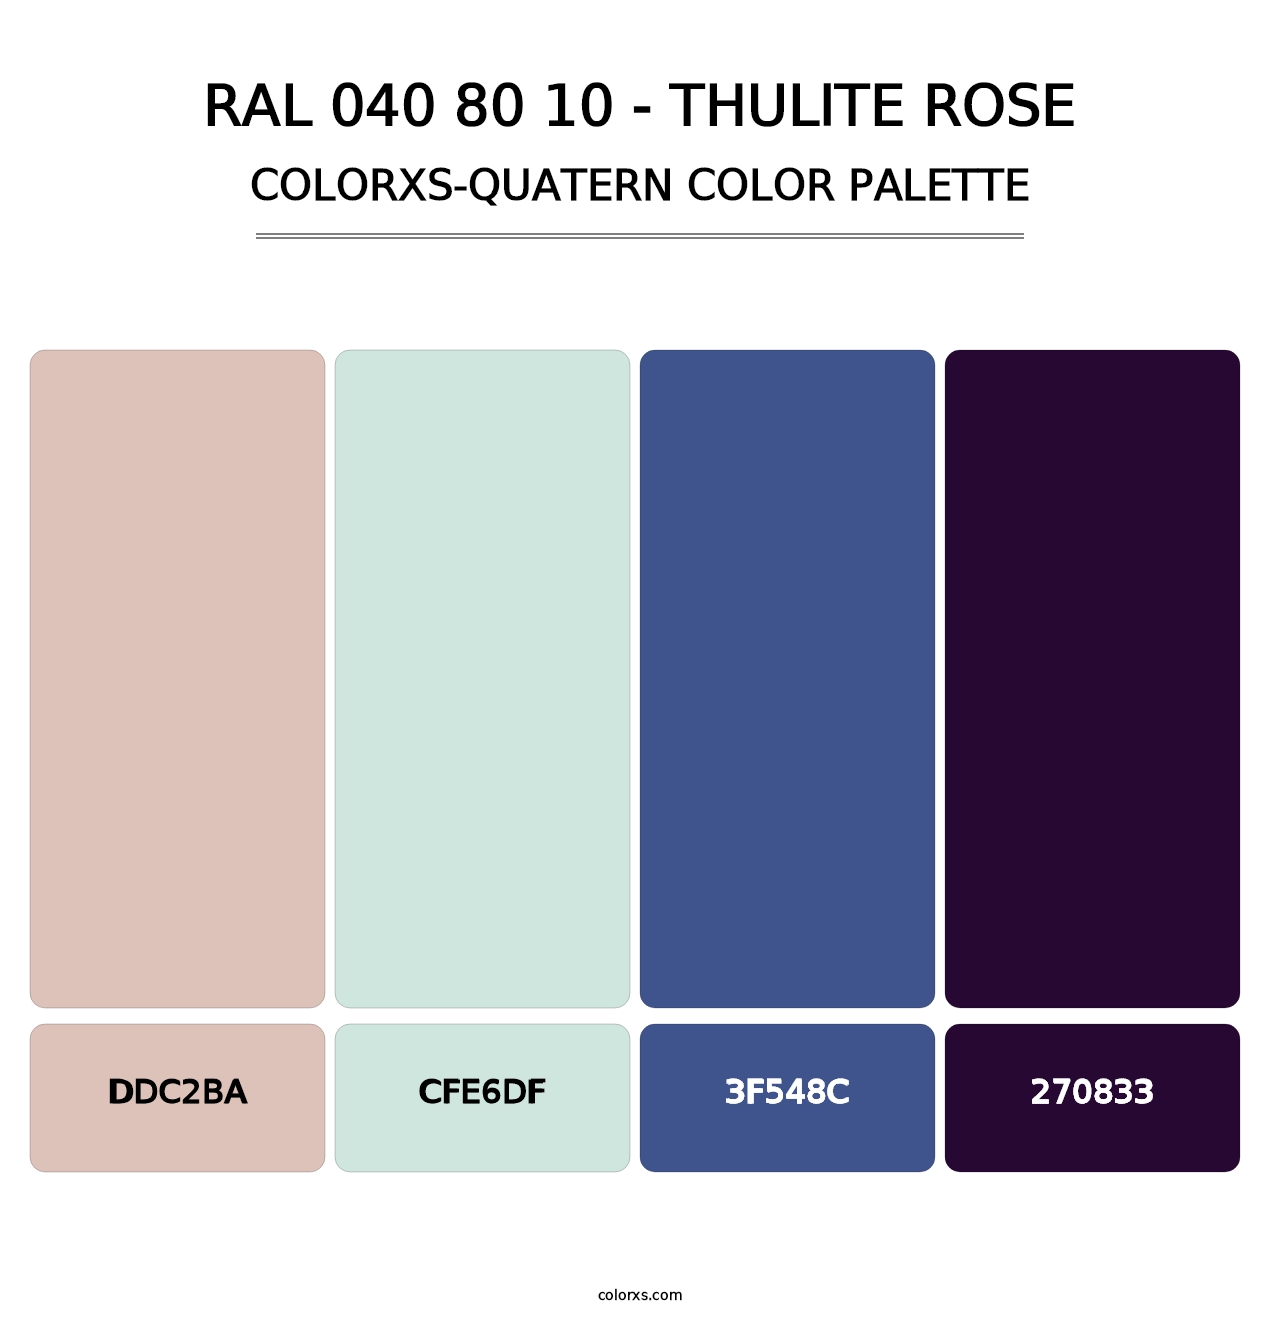 RAL 040 80 10 - Thulite Rose - Colorxs Quatern Palette